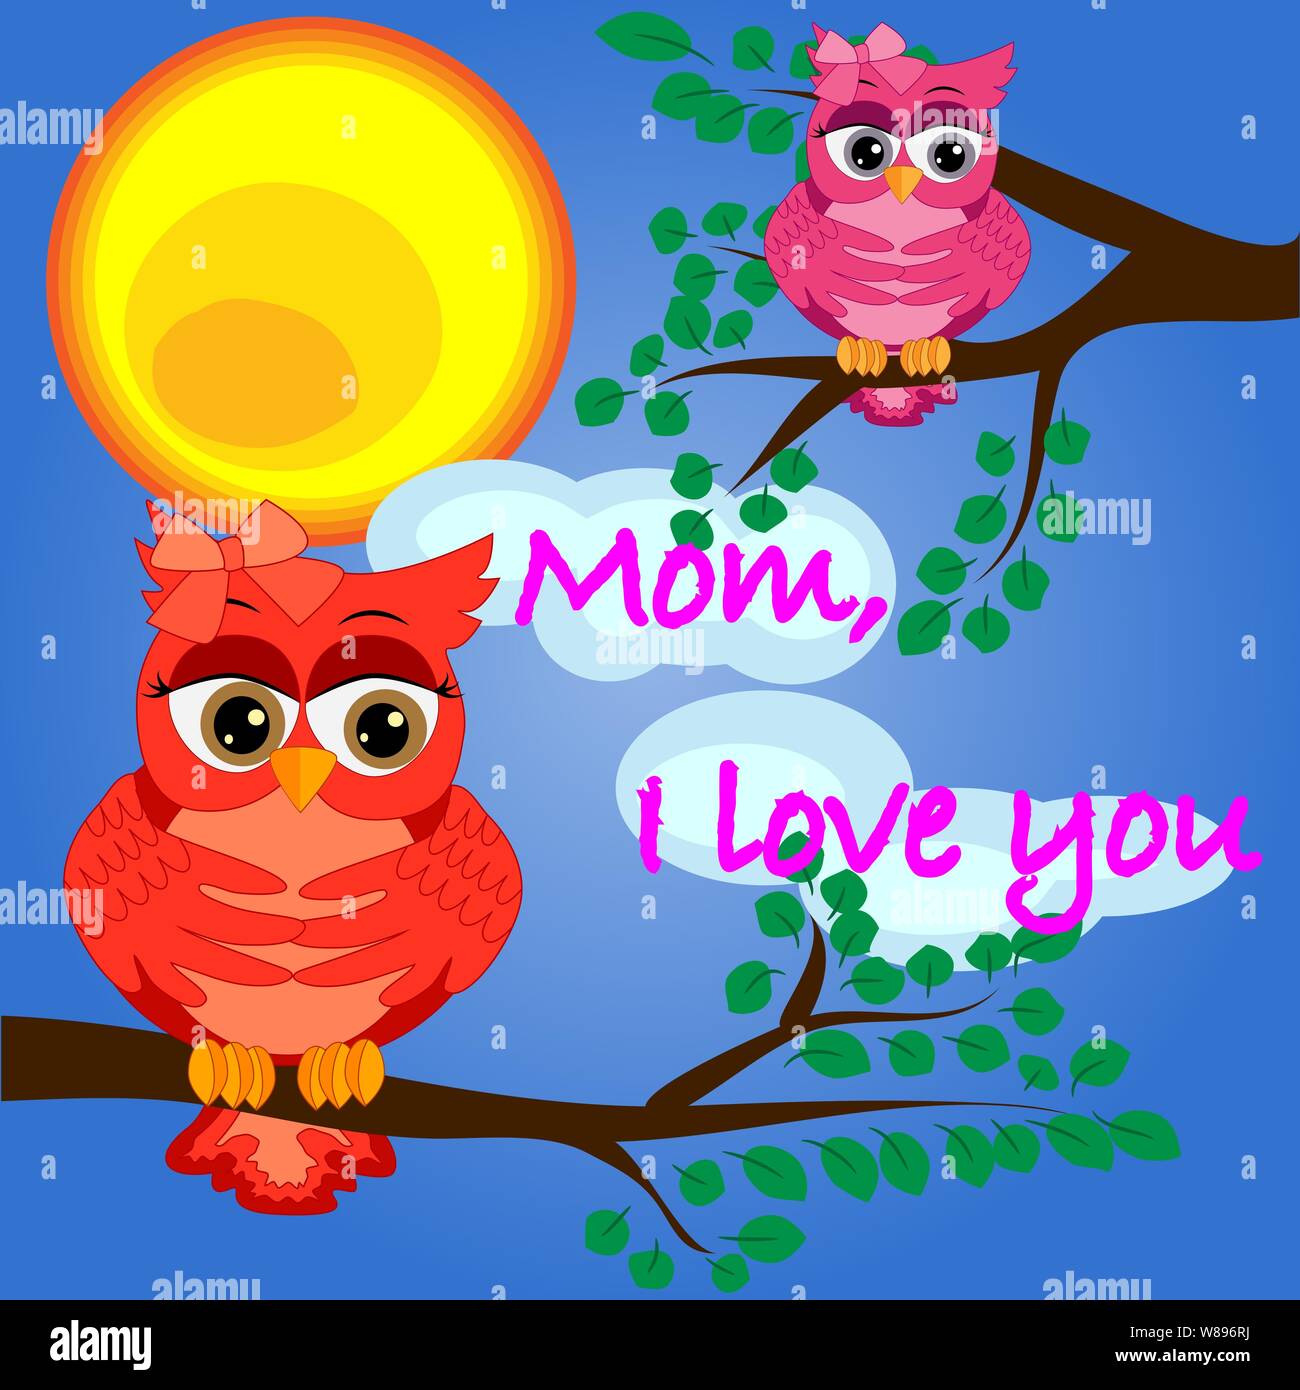 Mom, i love you. mother day greeting card with owl graphic Stock ...